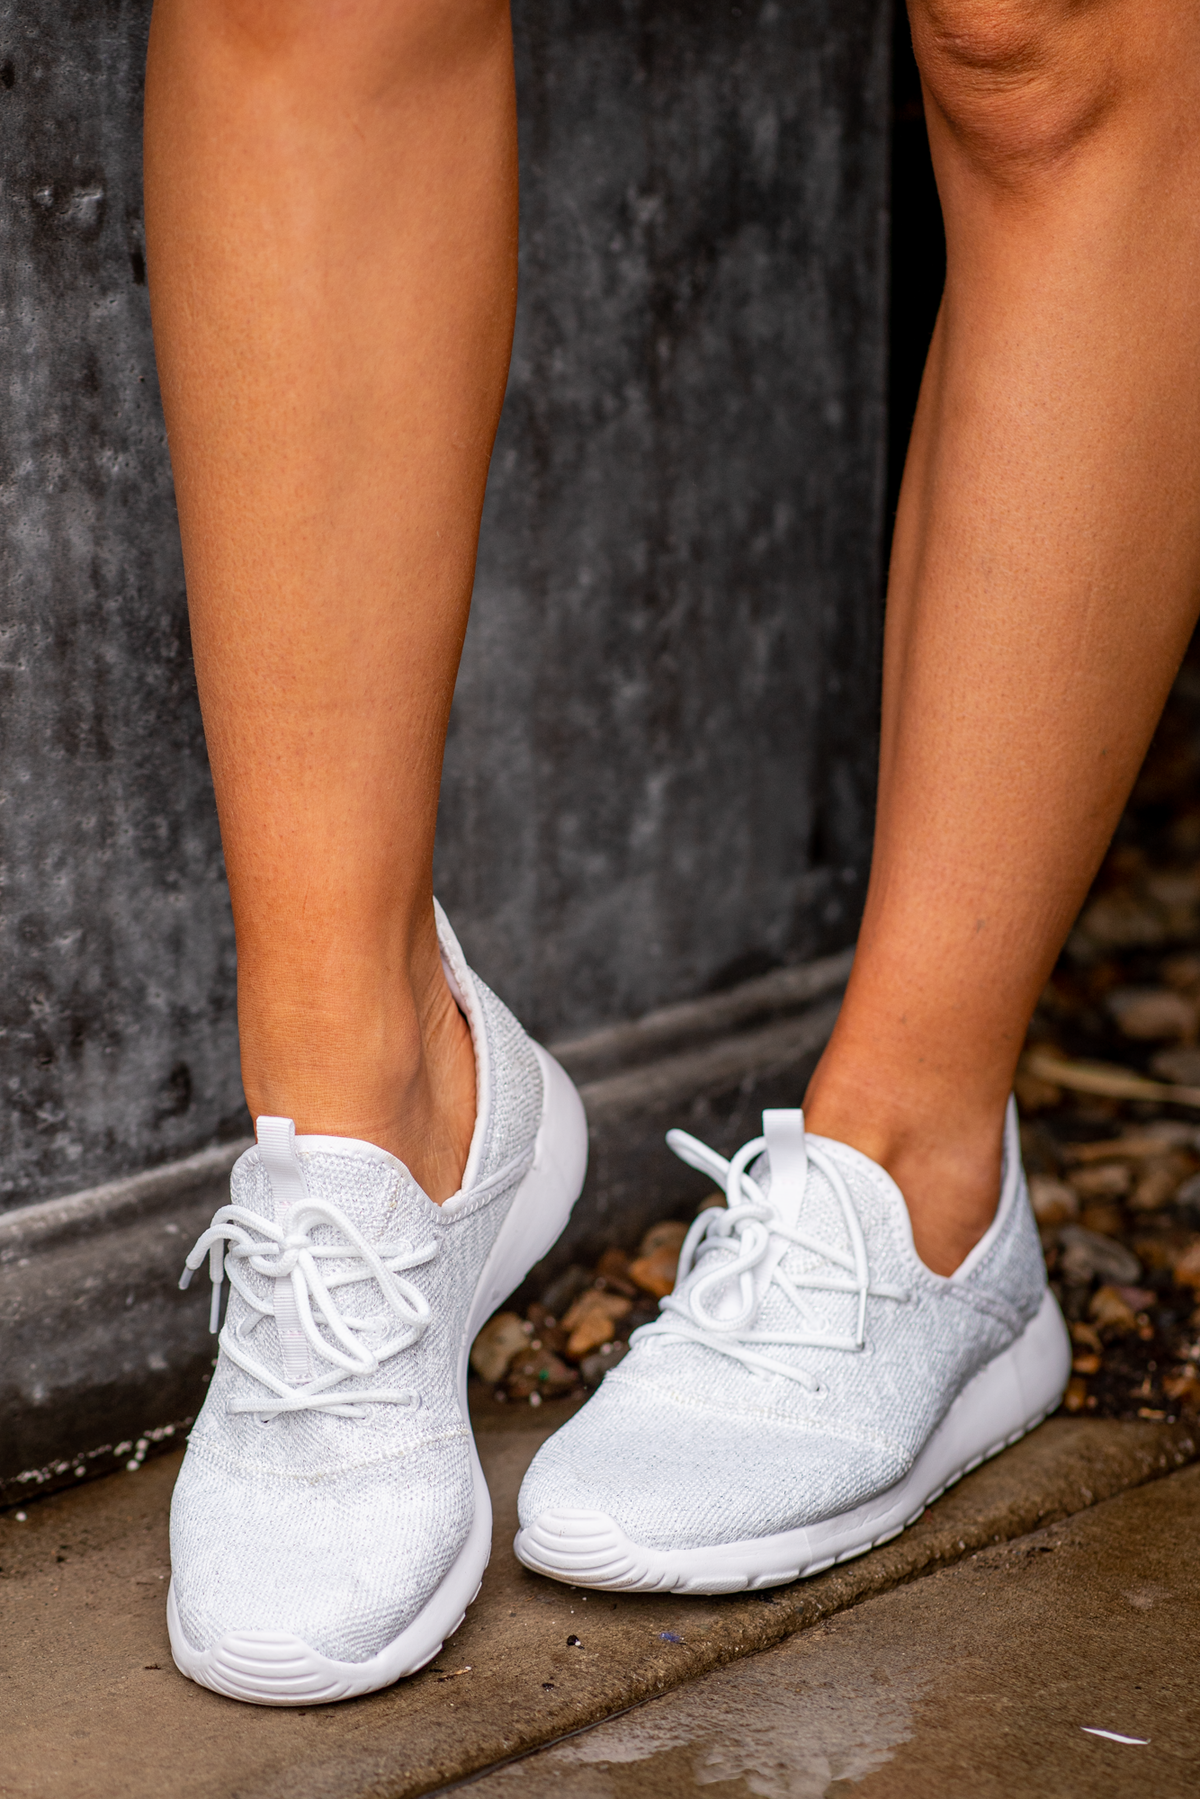 Sneakers Shoes | Very G  These shoes from Gyspy Jazz are comfortable and bold. Style Name: Liliana    Color: White Cut: Sneakers   Rubber Sole Style #: VGSP0132-White Contact us for any additional measurements or sizing. 